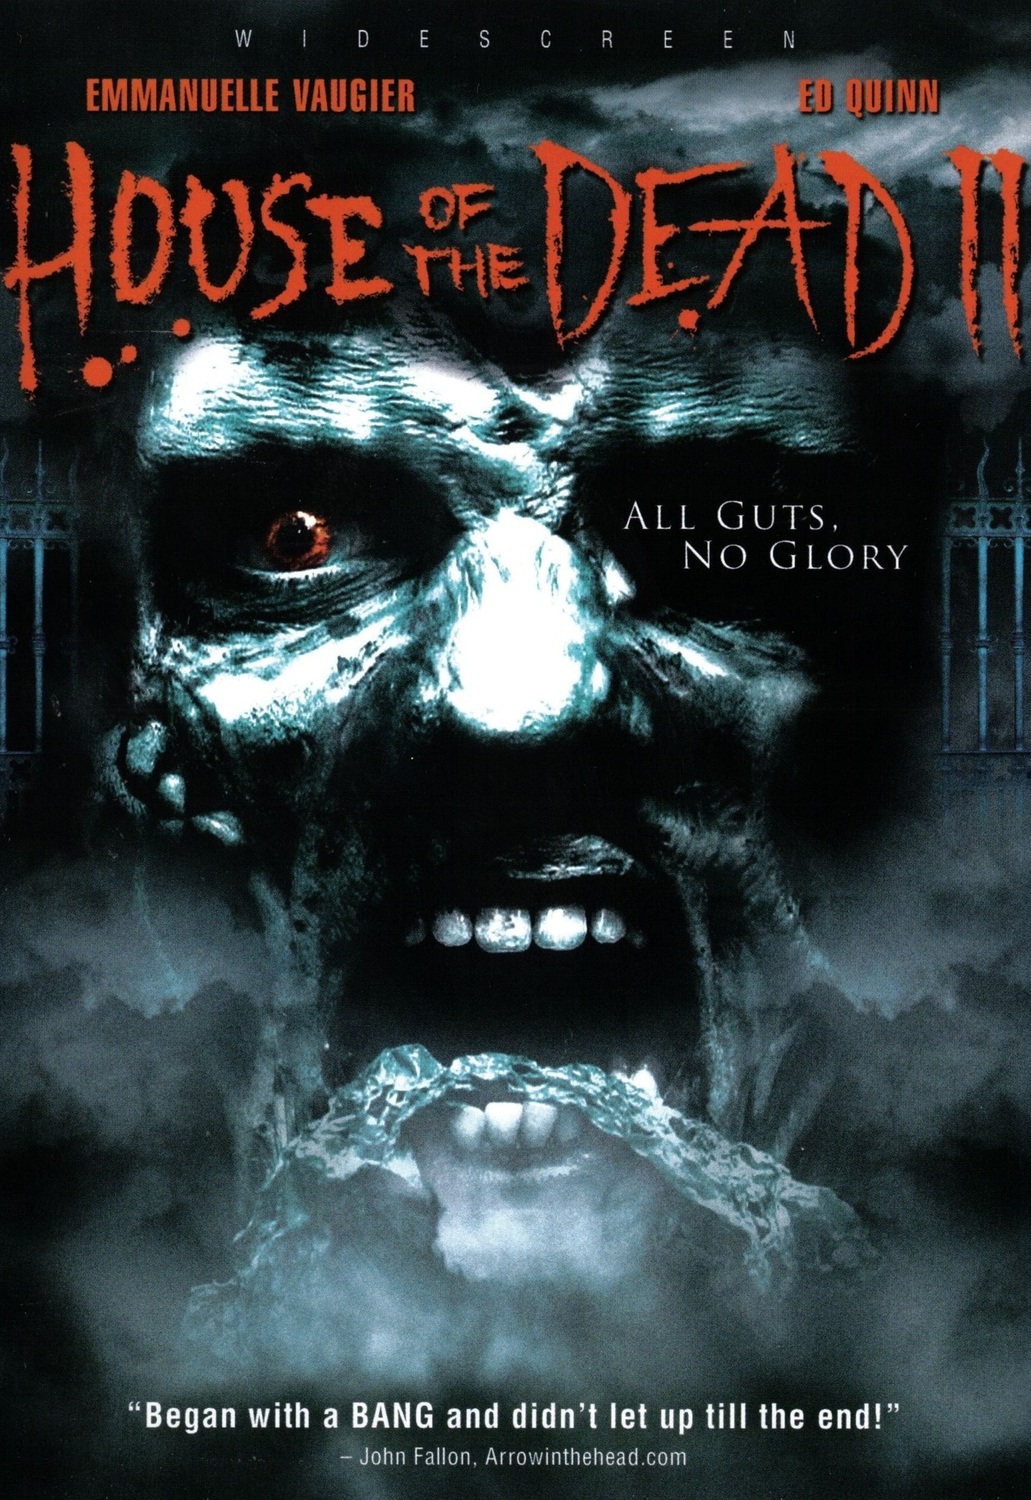 The House of the Dead 2 (2005)